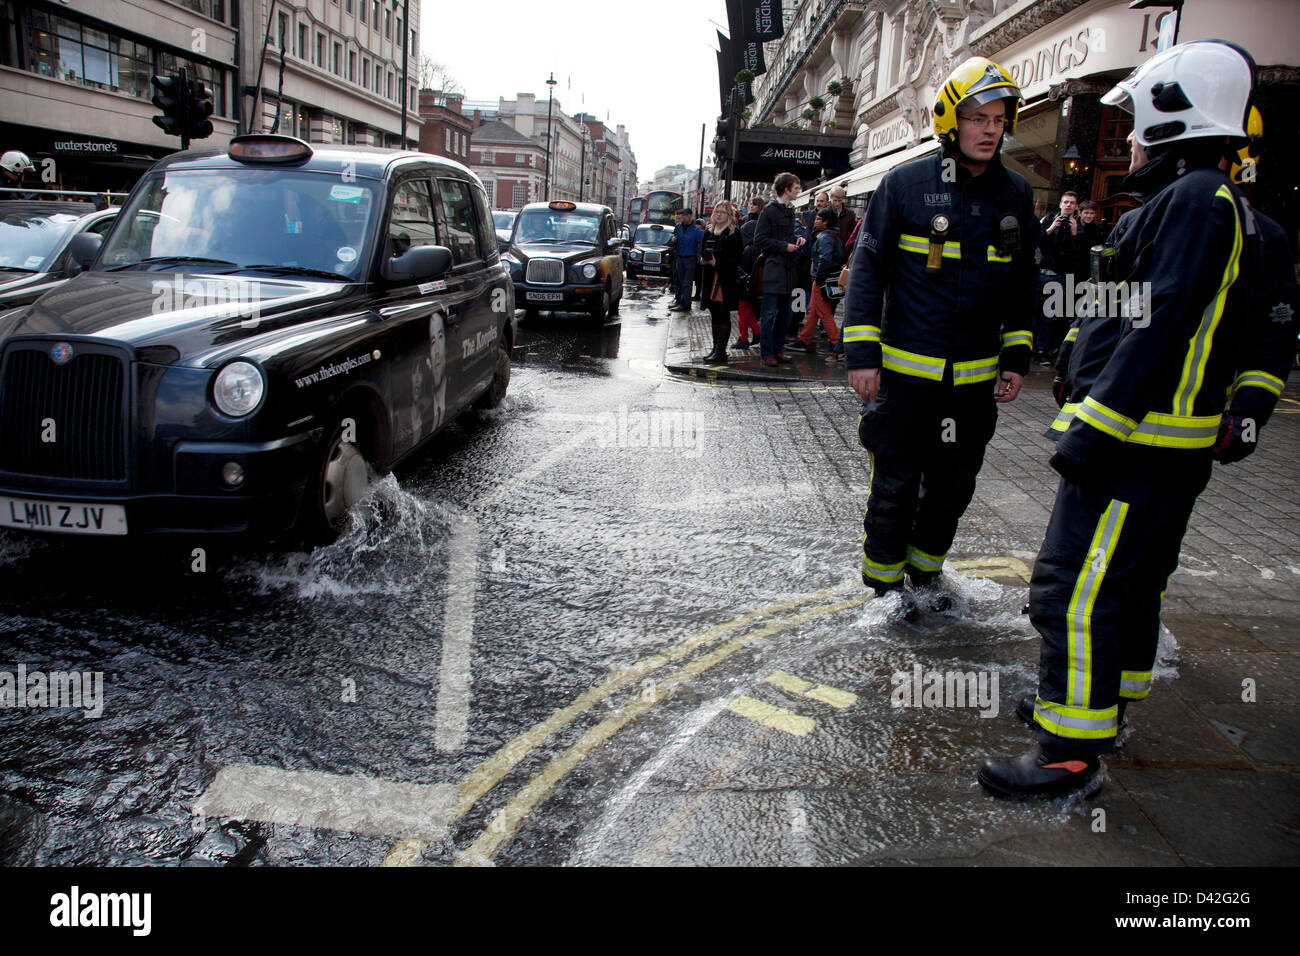 London, UK. Saturday 2nd March 2013. Burst water main causes flooding disruption in central London. Emergency services on hand at the scene. Stock Photo